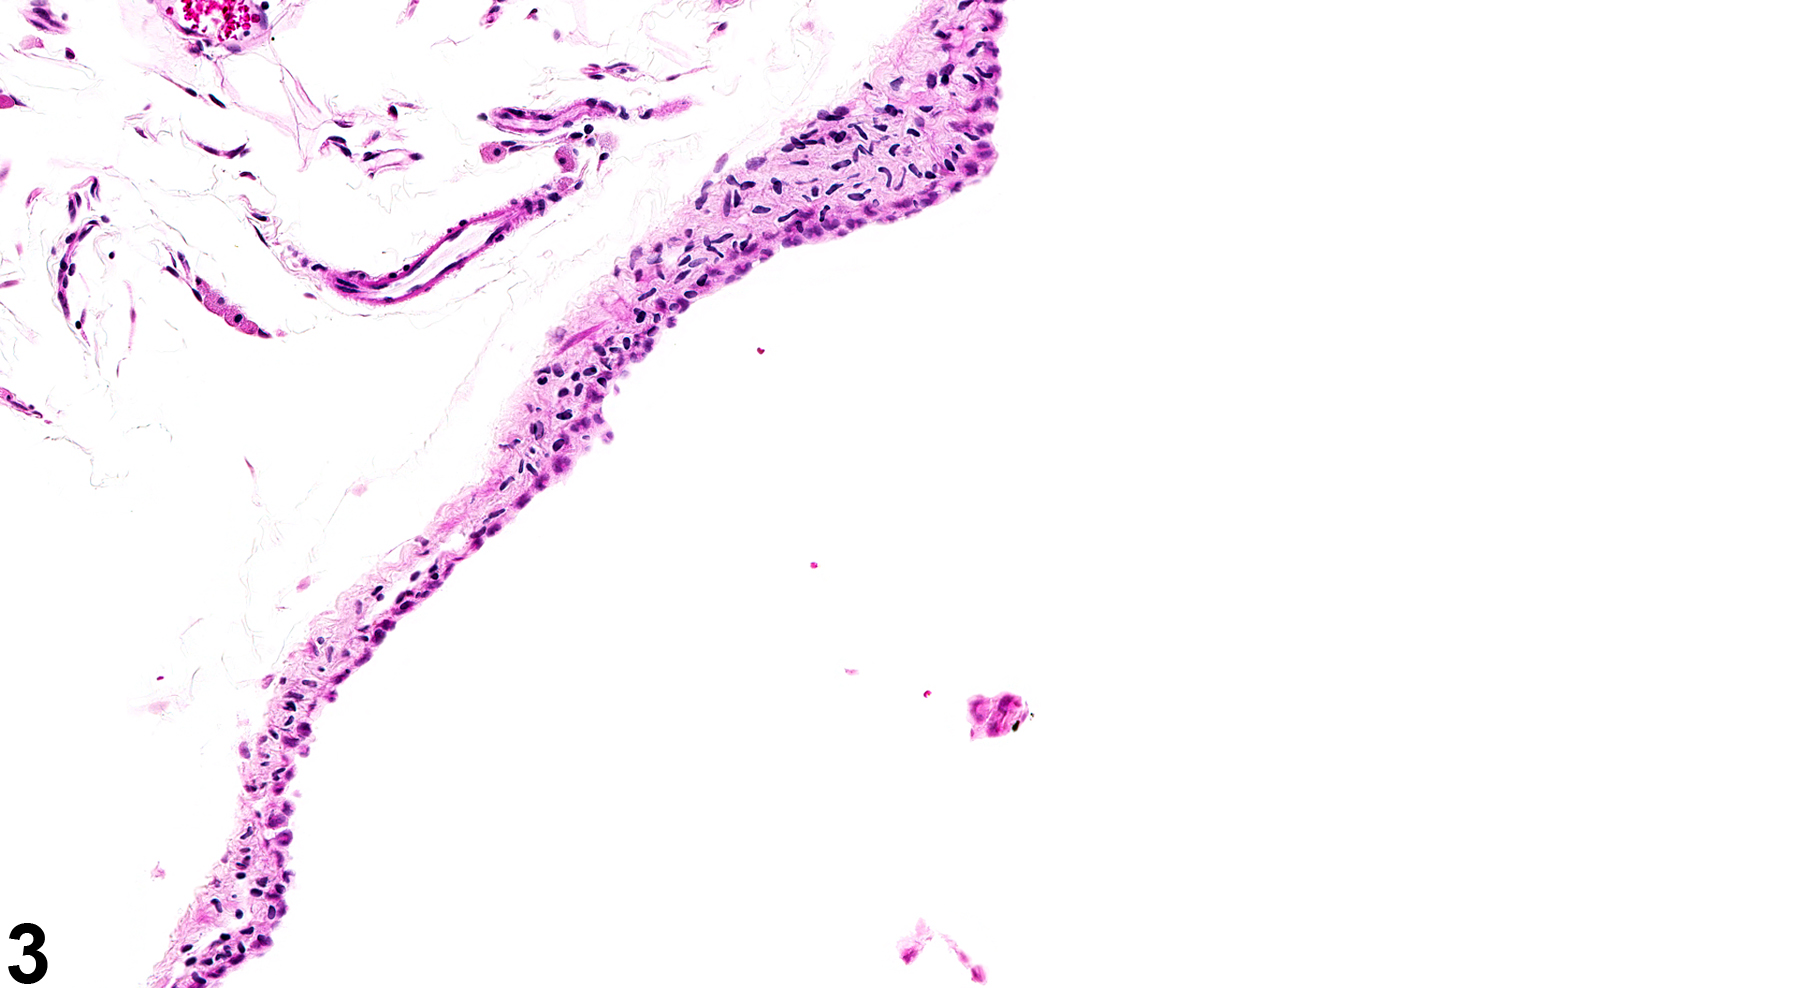 Image of bursal cyst in the ovary from a female F344/N rat in a chronic study